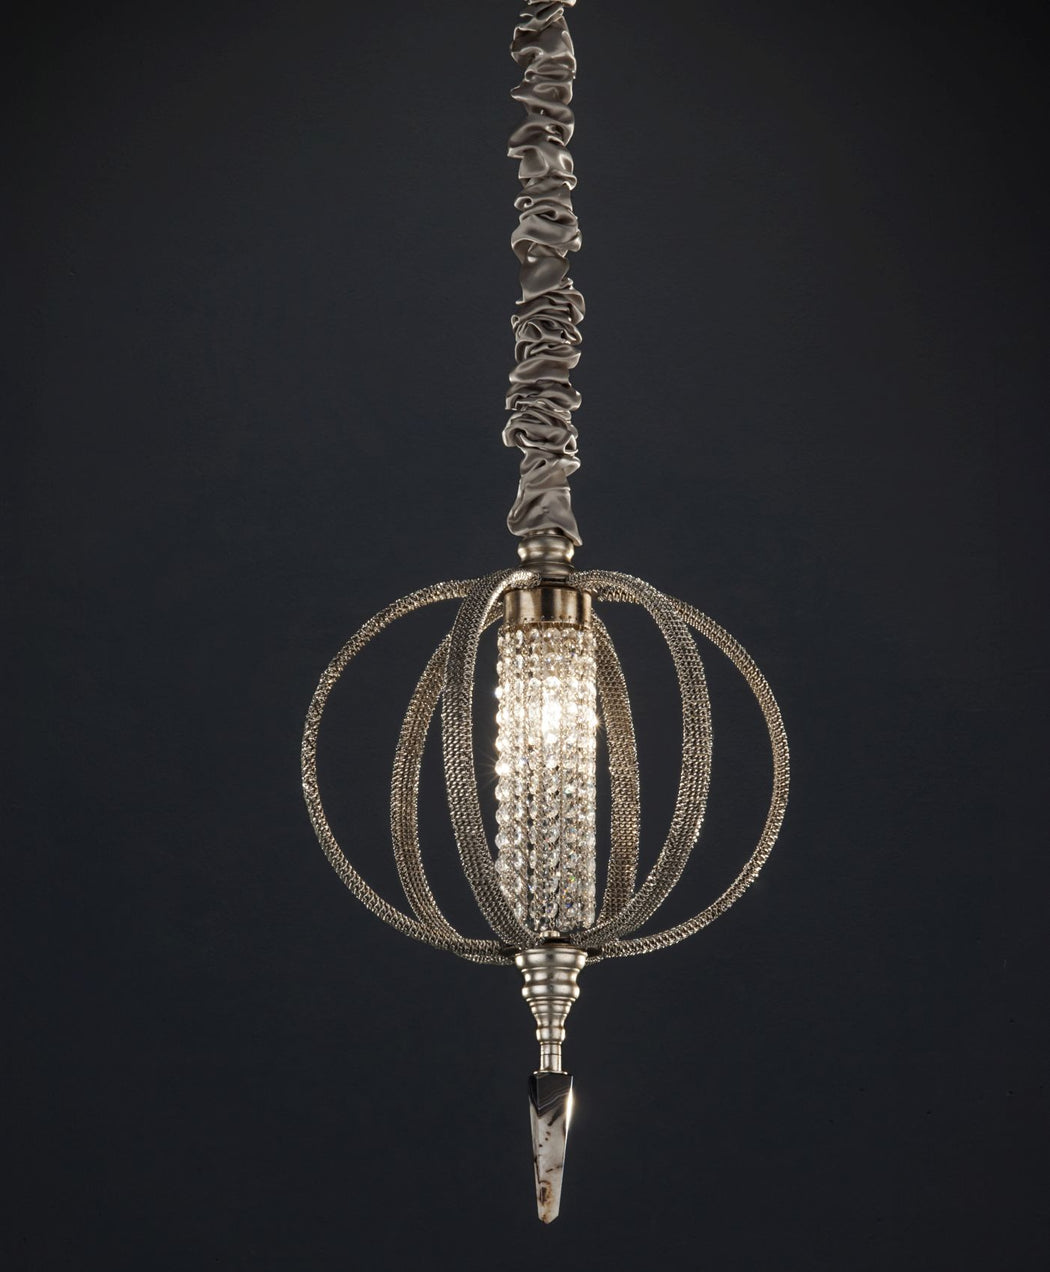 Elegant agate and crystal orb pendant light with crystal chains